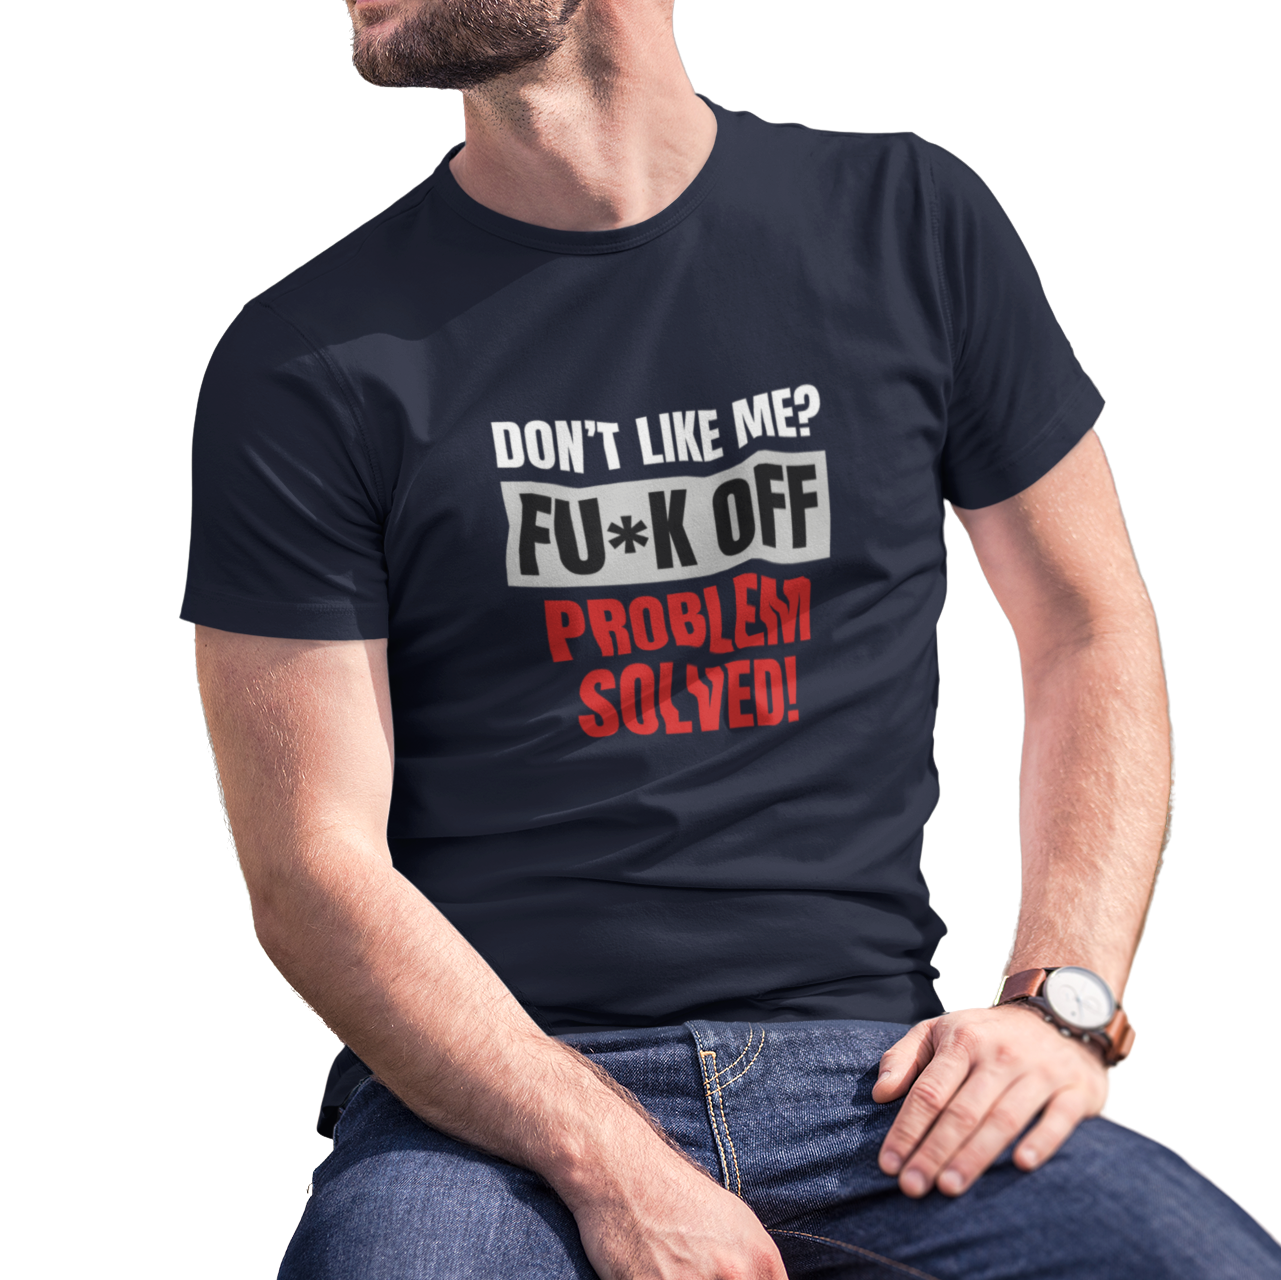 Buy navy Dont Like Me? Fuck off Male T-Shirt